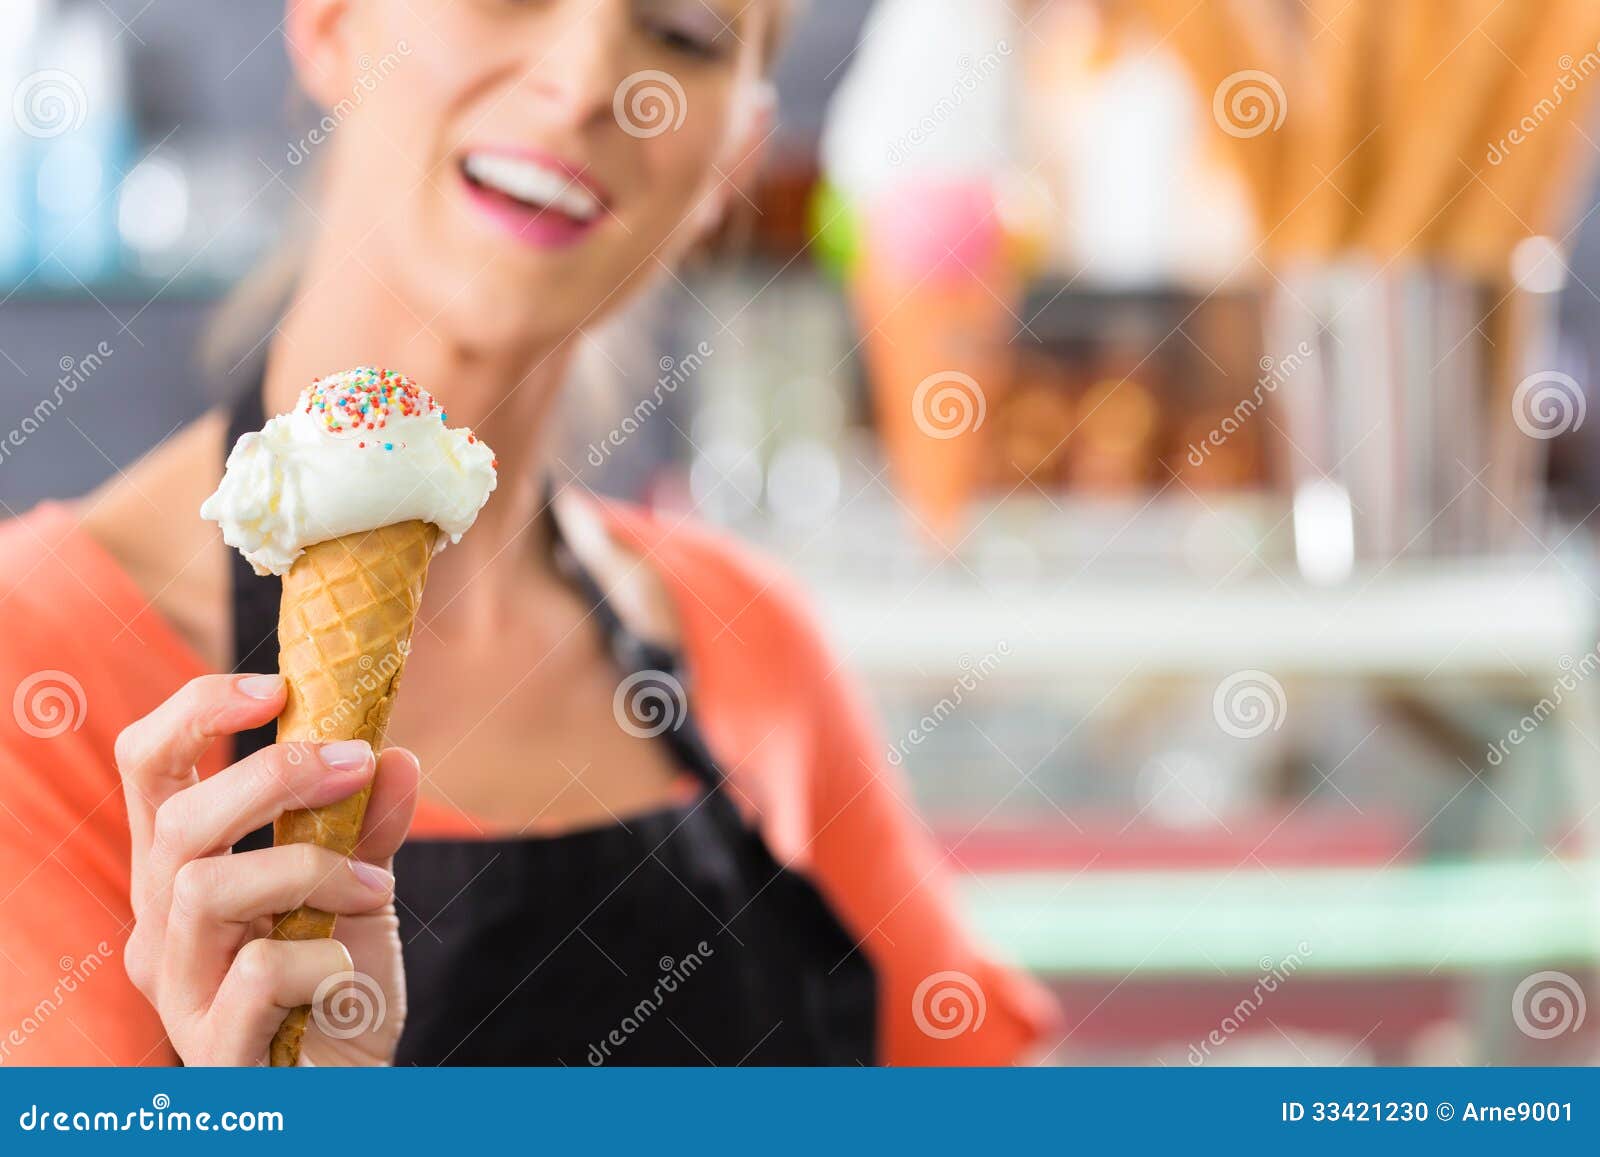 female seller in parlor with ice cream cone